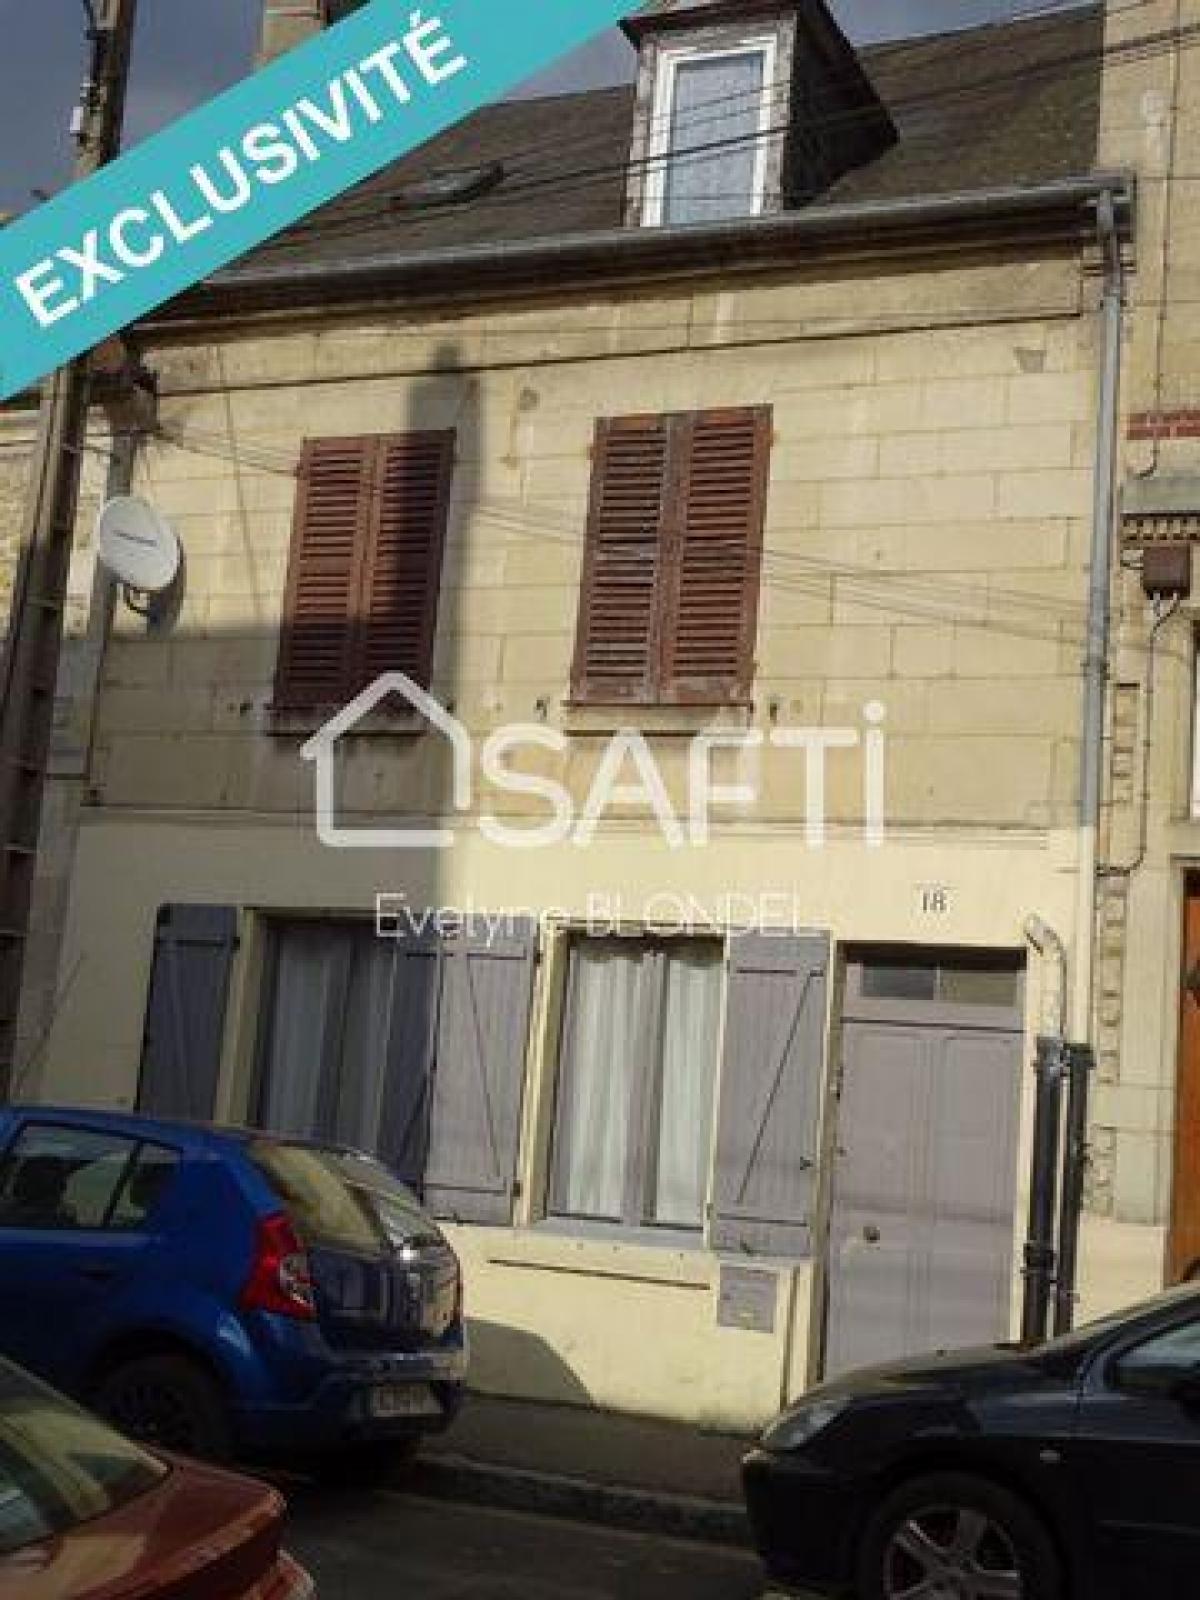 Picture of Apartment For Sale in Clermont, Picardie, France